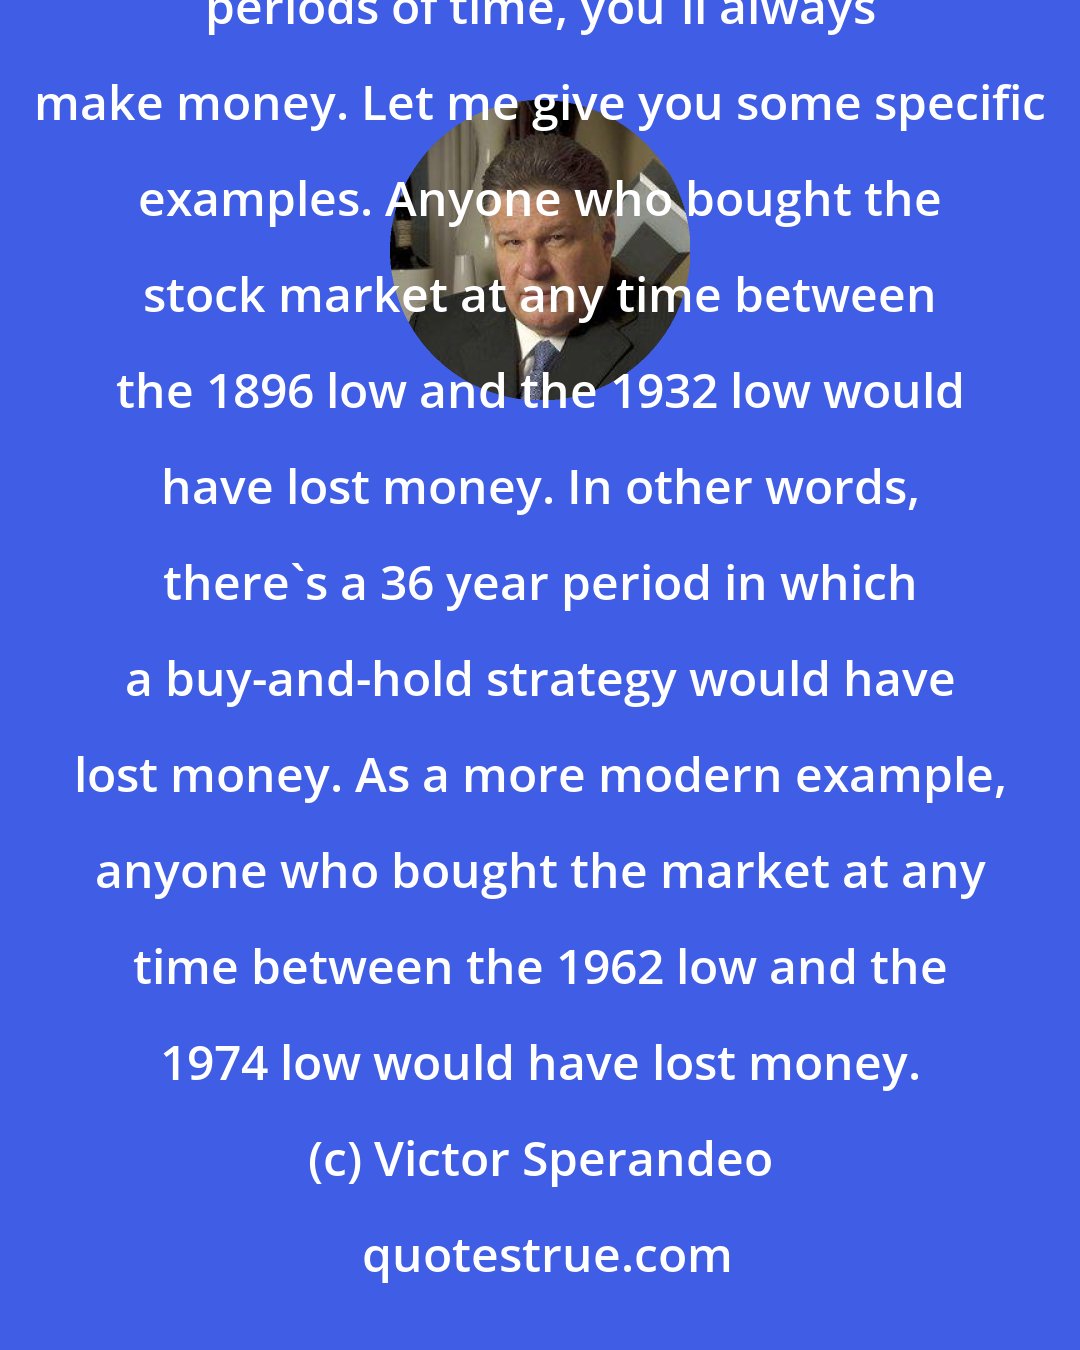 Victor Sperandeo: In my opinion, the greatest misconception about the market is the idea that if you buy and hold stocks for long periods of time, you'll always make money. Let me give you some specific examples. Anyone who bought the stock market at any time between the 1896 low and the 1932 low would have lost money. In other words, there's a 36 year period in which a buy-and-hold strategy would have lost money. As a more modern example, anyone who bought the market at any time between the 1962 low and the 1974 low would have lost money.